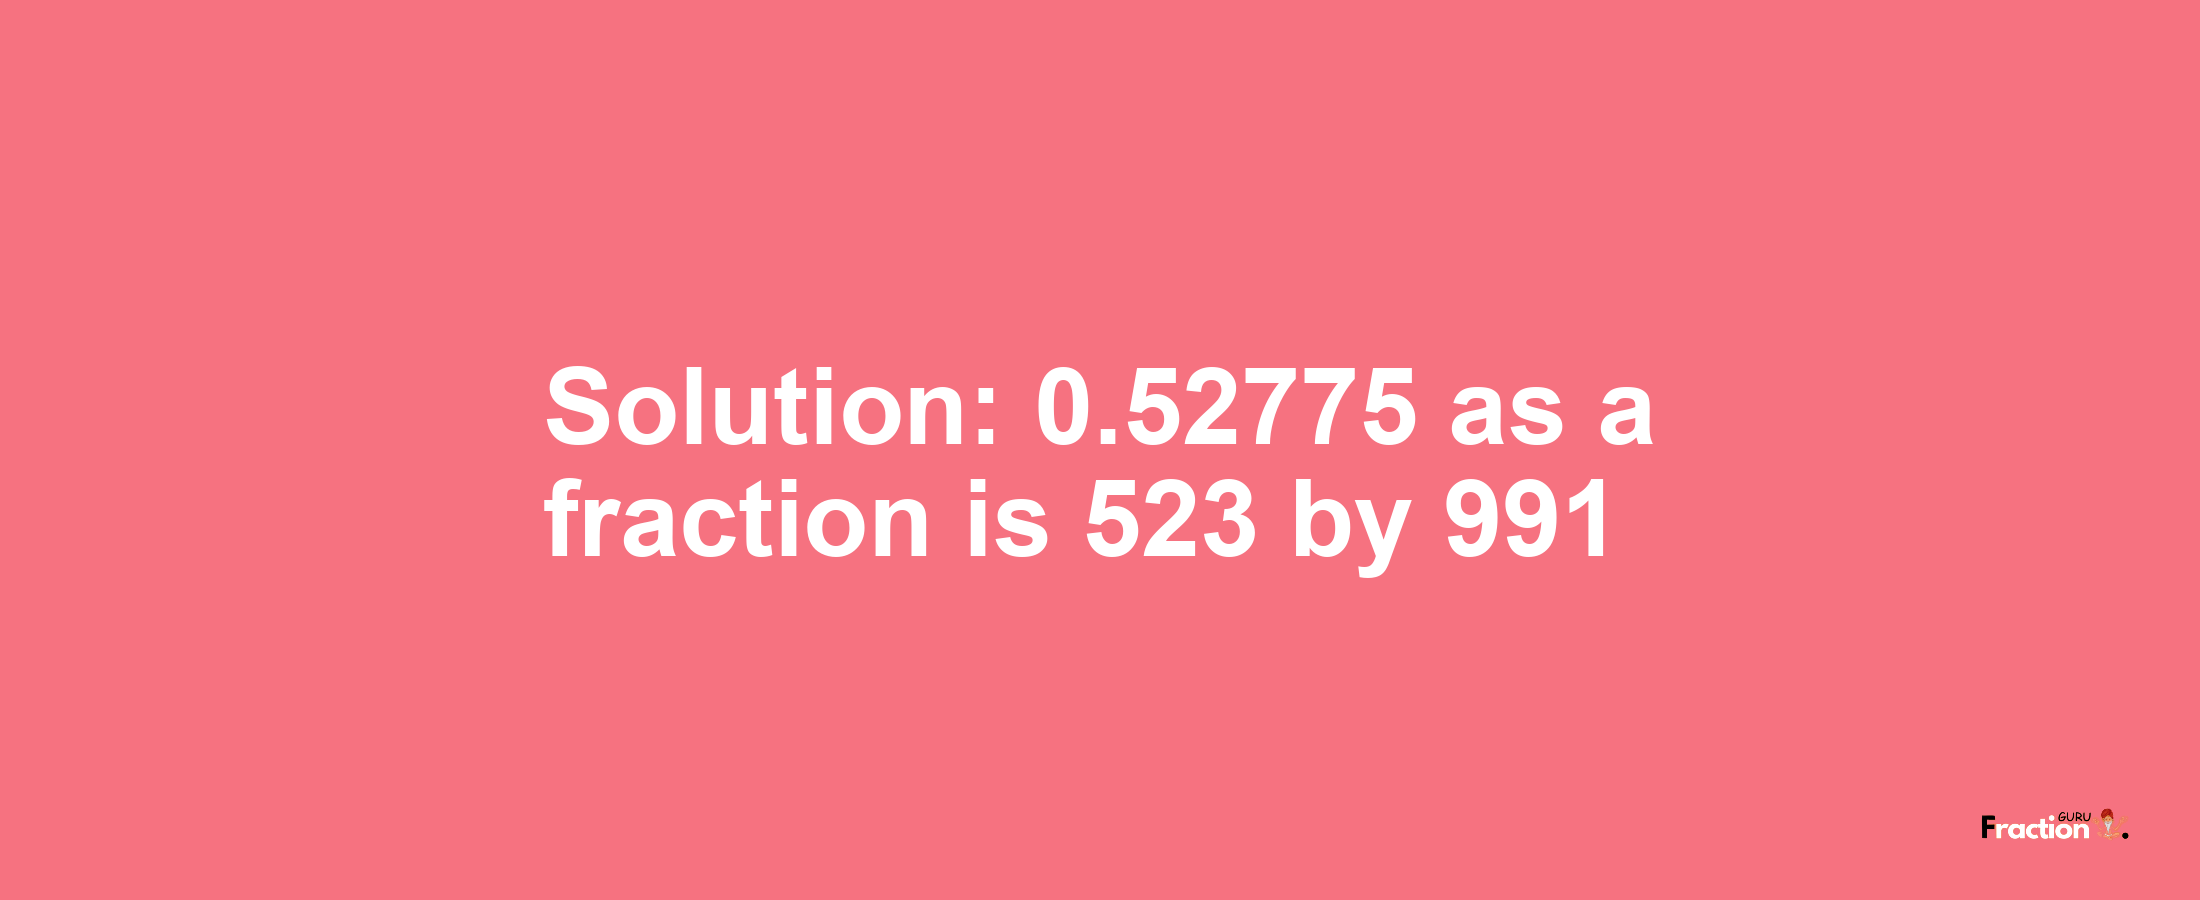 Solution:0.52775 as a fraction is 523/991